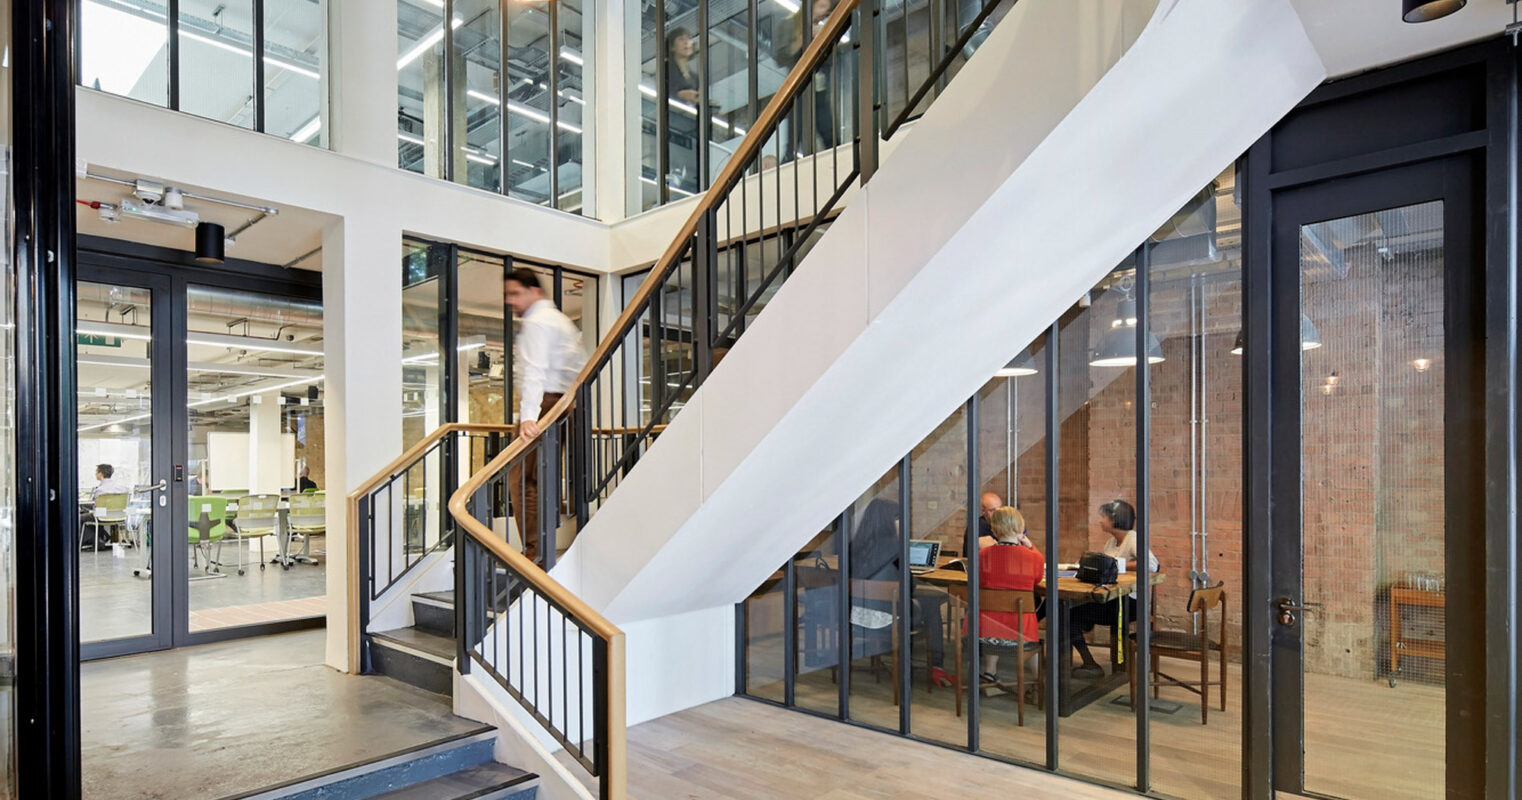 Modern office interior featuring a minimalist staircase with sleek metal railings, light wooden steps, and adjacent glass panels allowing visibility into collaborative workspace areas with exposed brick walls and contemporary furnishings. Natural light floods in from generous skylights above.